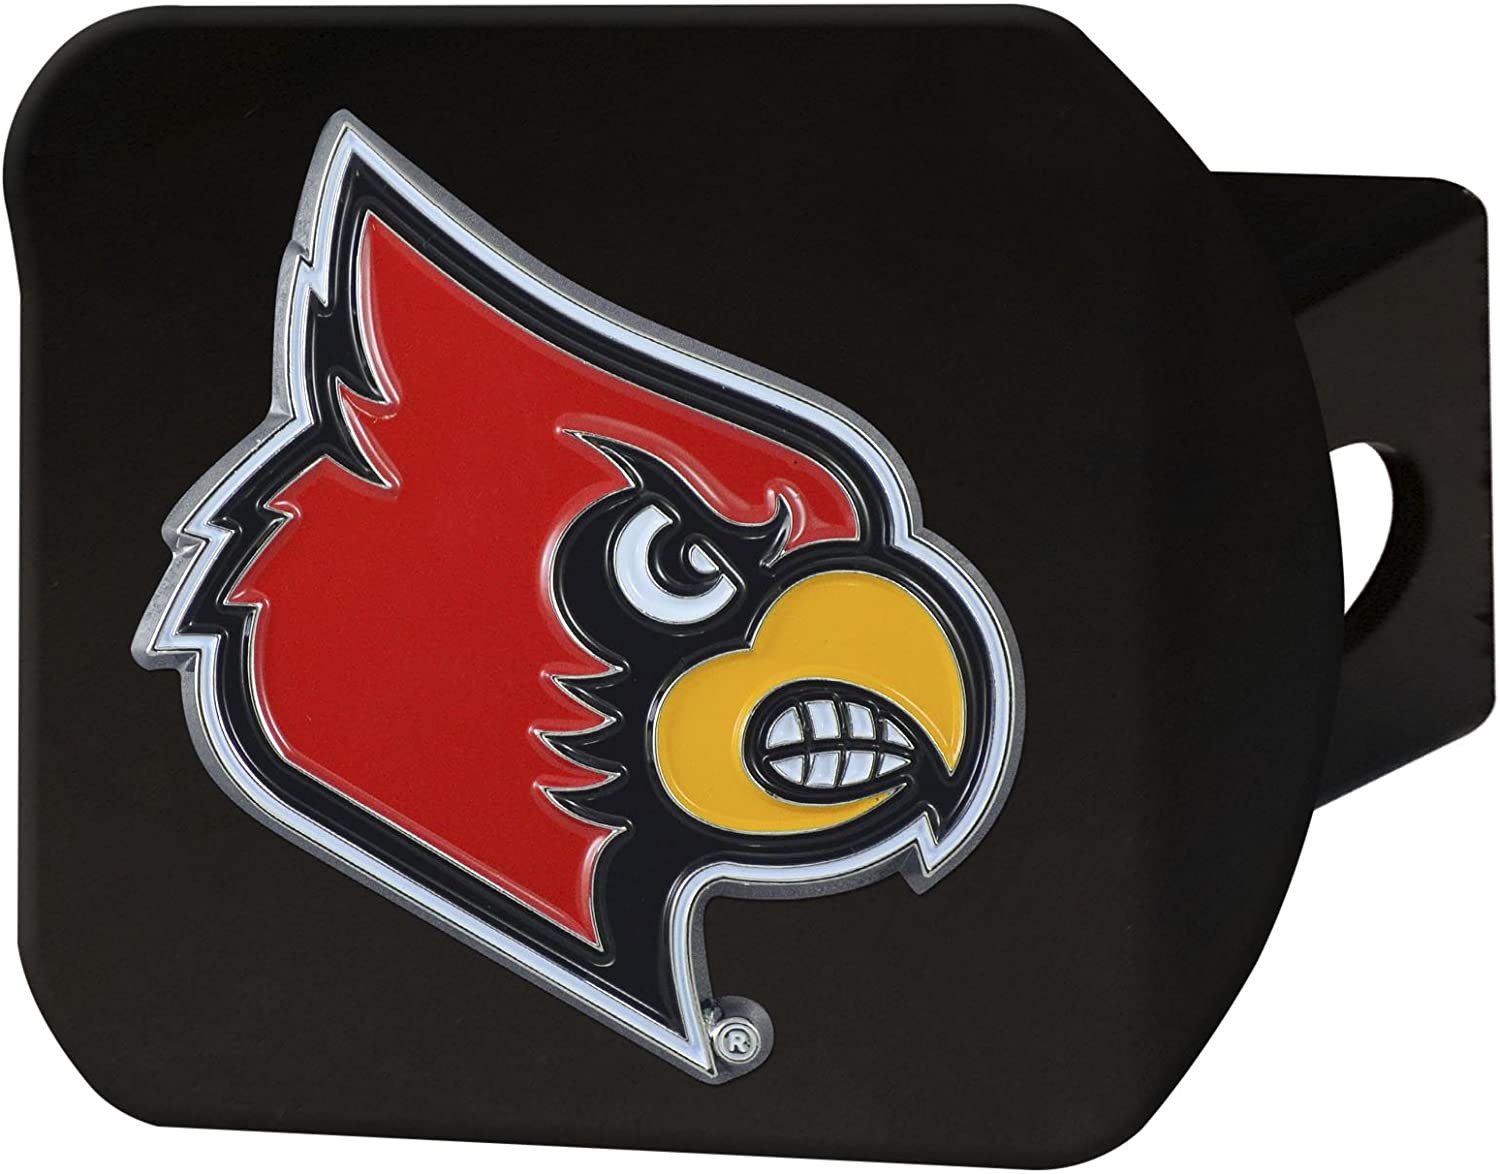 Louisville Cardinals Solid Metal Black Hitch Cover with Color Metal Emblem 2 Inch Square Type III University of